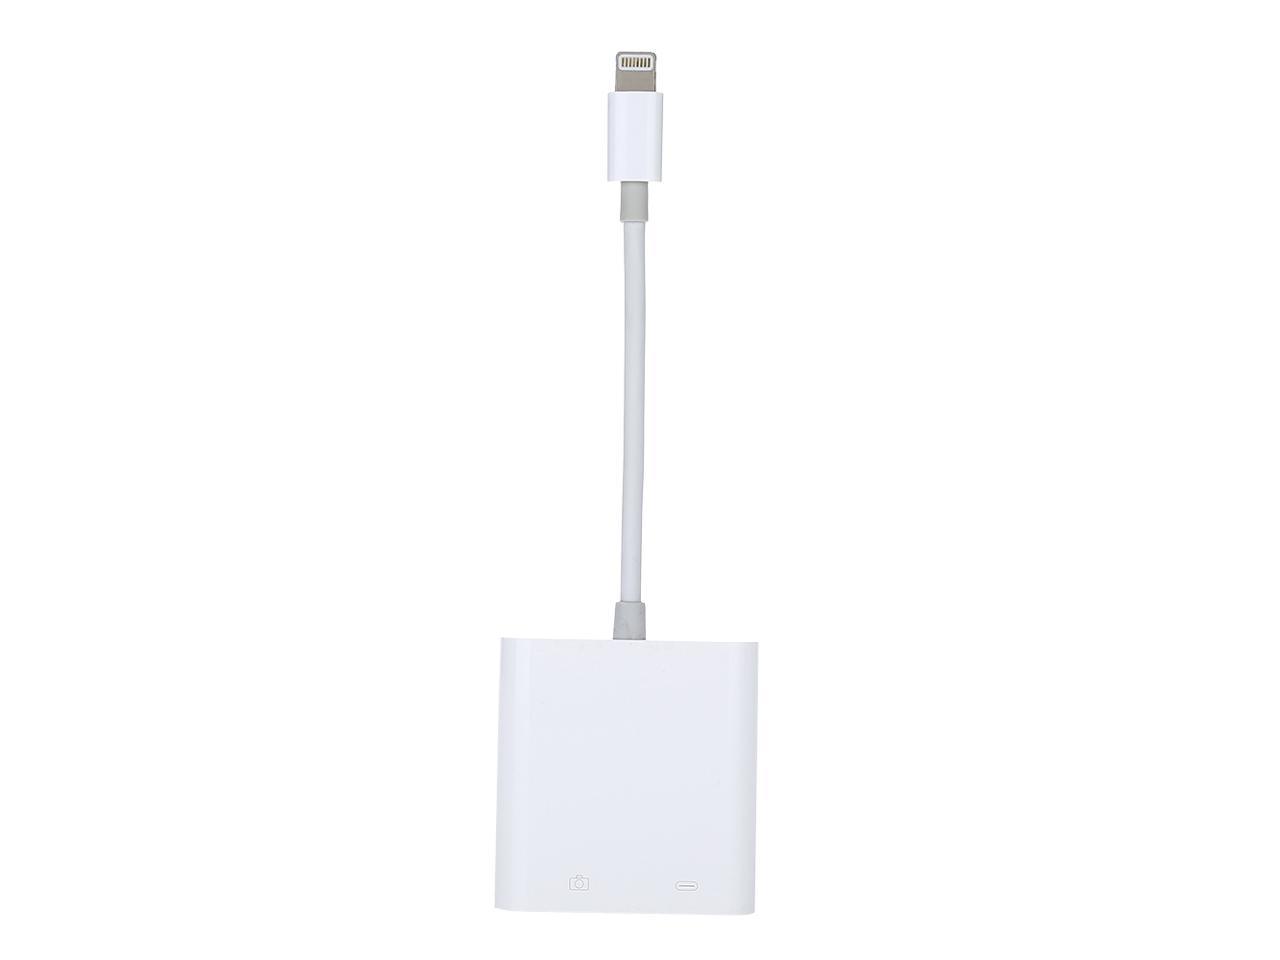 Lightning To USB Camera Adapter Cable With USB Power Interface White For iPhone 8/8Plus/7/7Plus/6/6S/6Plus and iPad